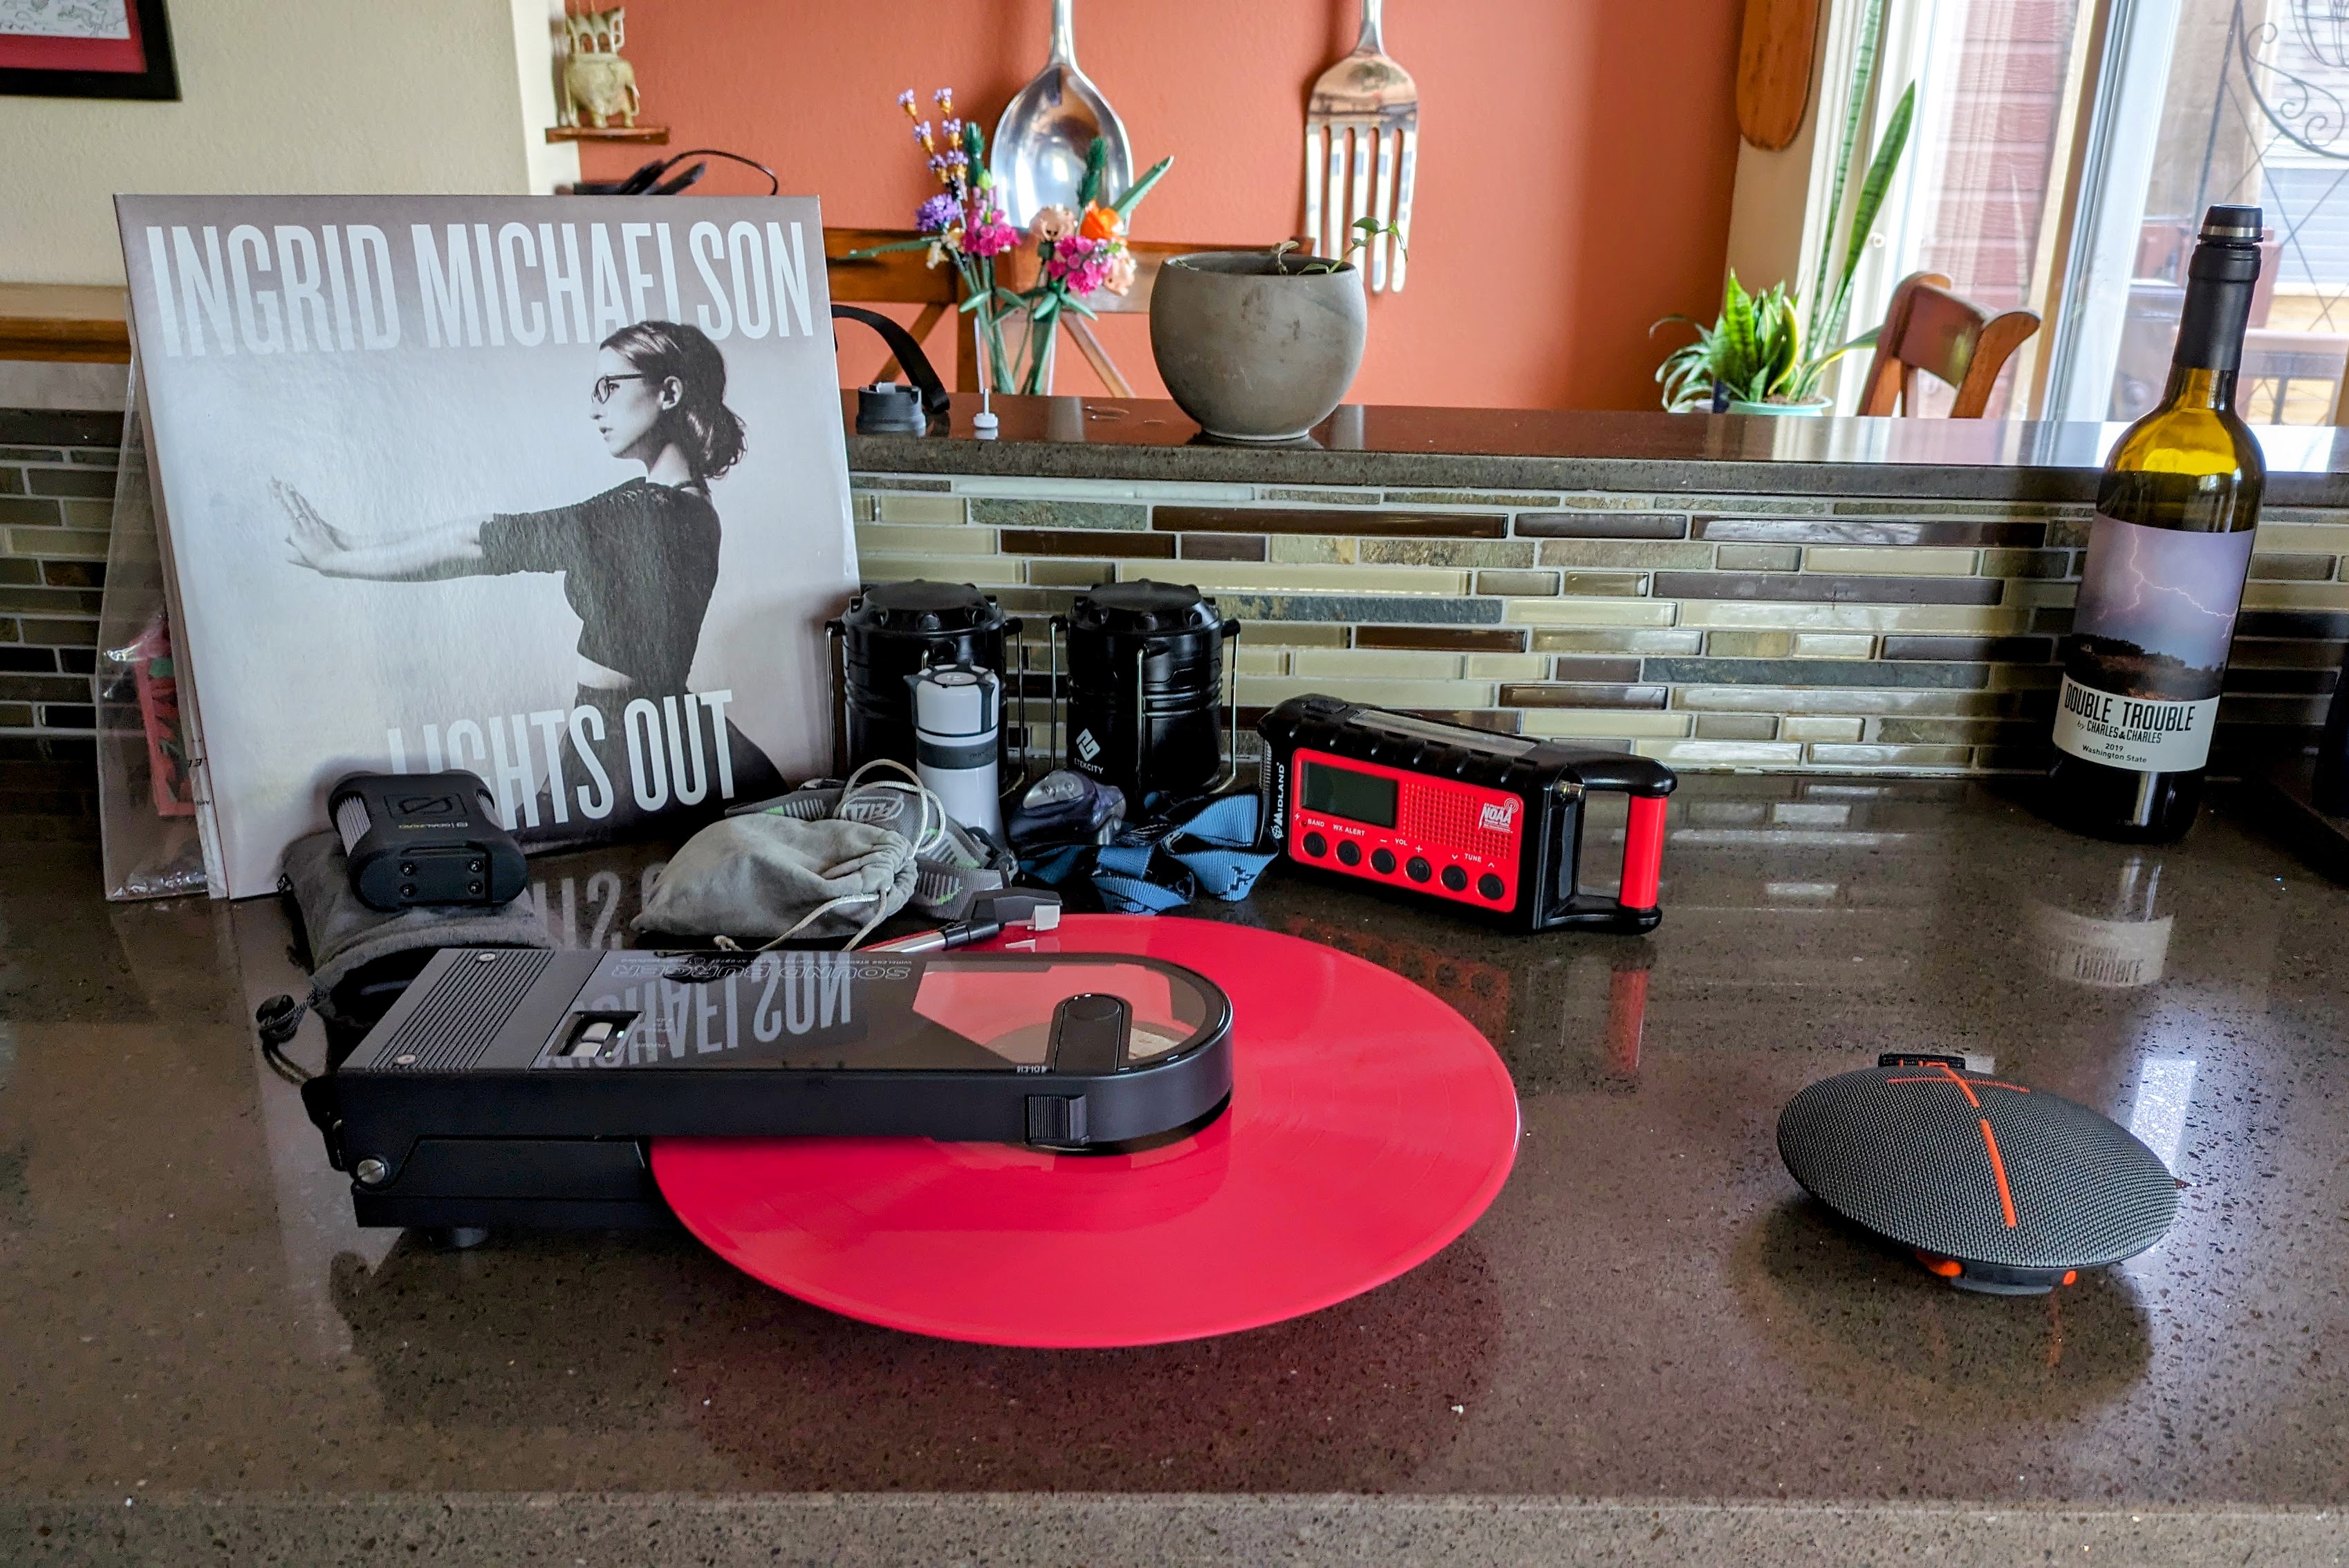 Battery-powered turntable playing “Lights Out”